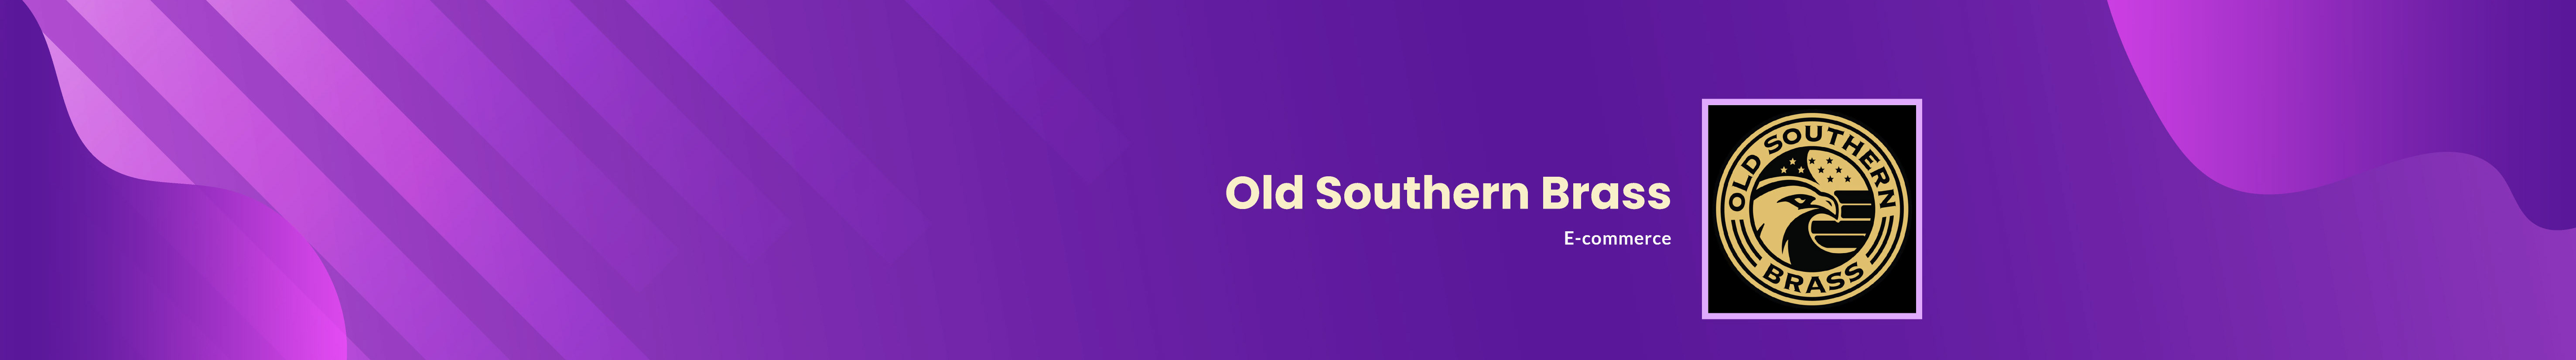 Old Southern Brass's profile banner